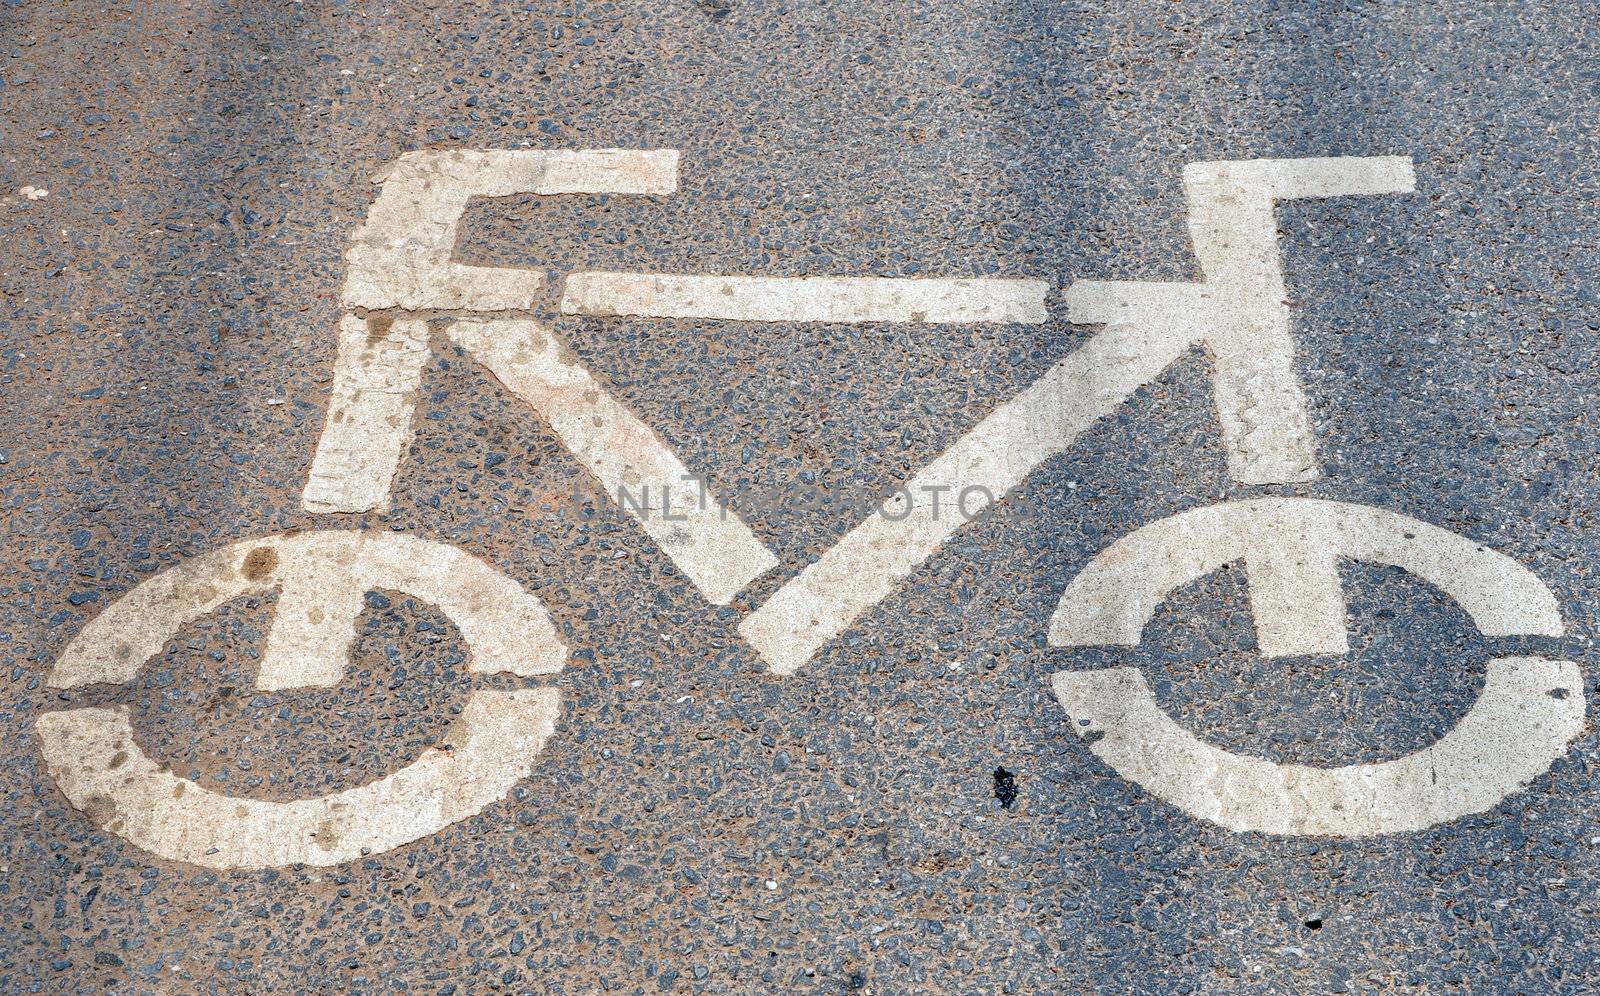 Bike lanes and road shoulders demarcated by a painted marking are quite common both in many European and American cities.